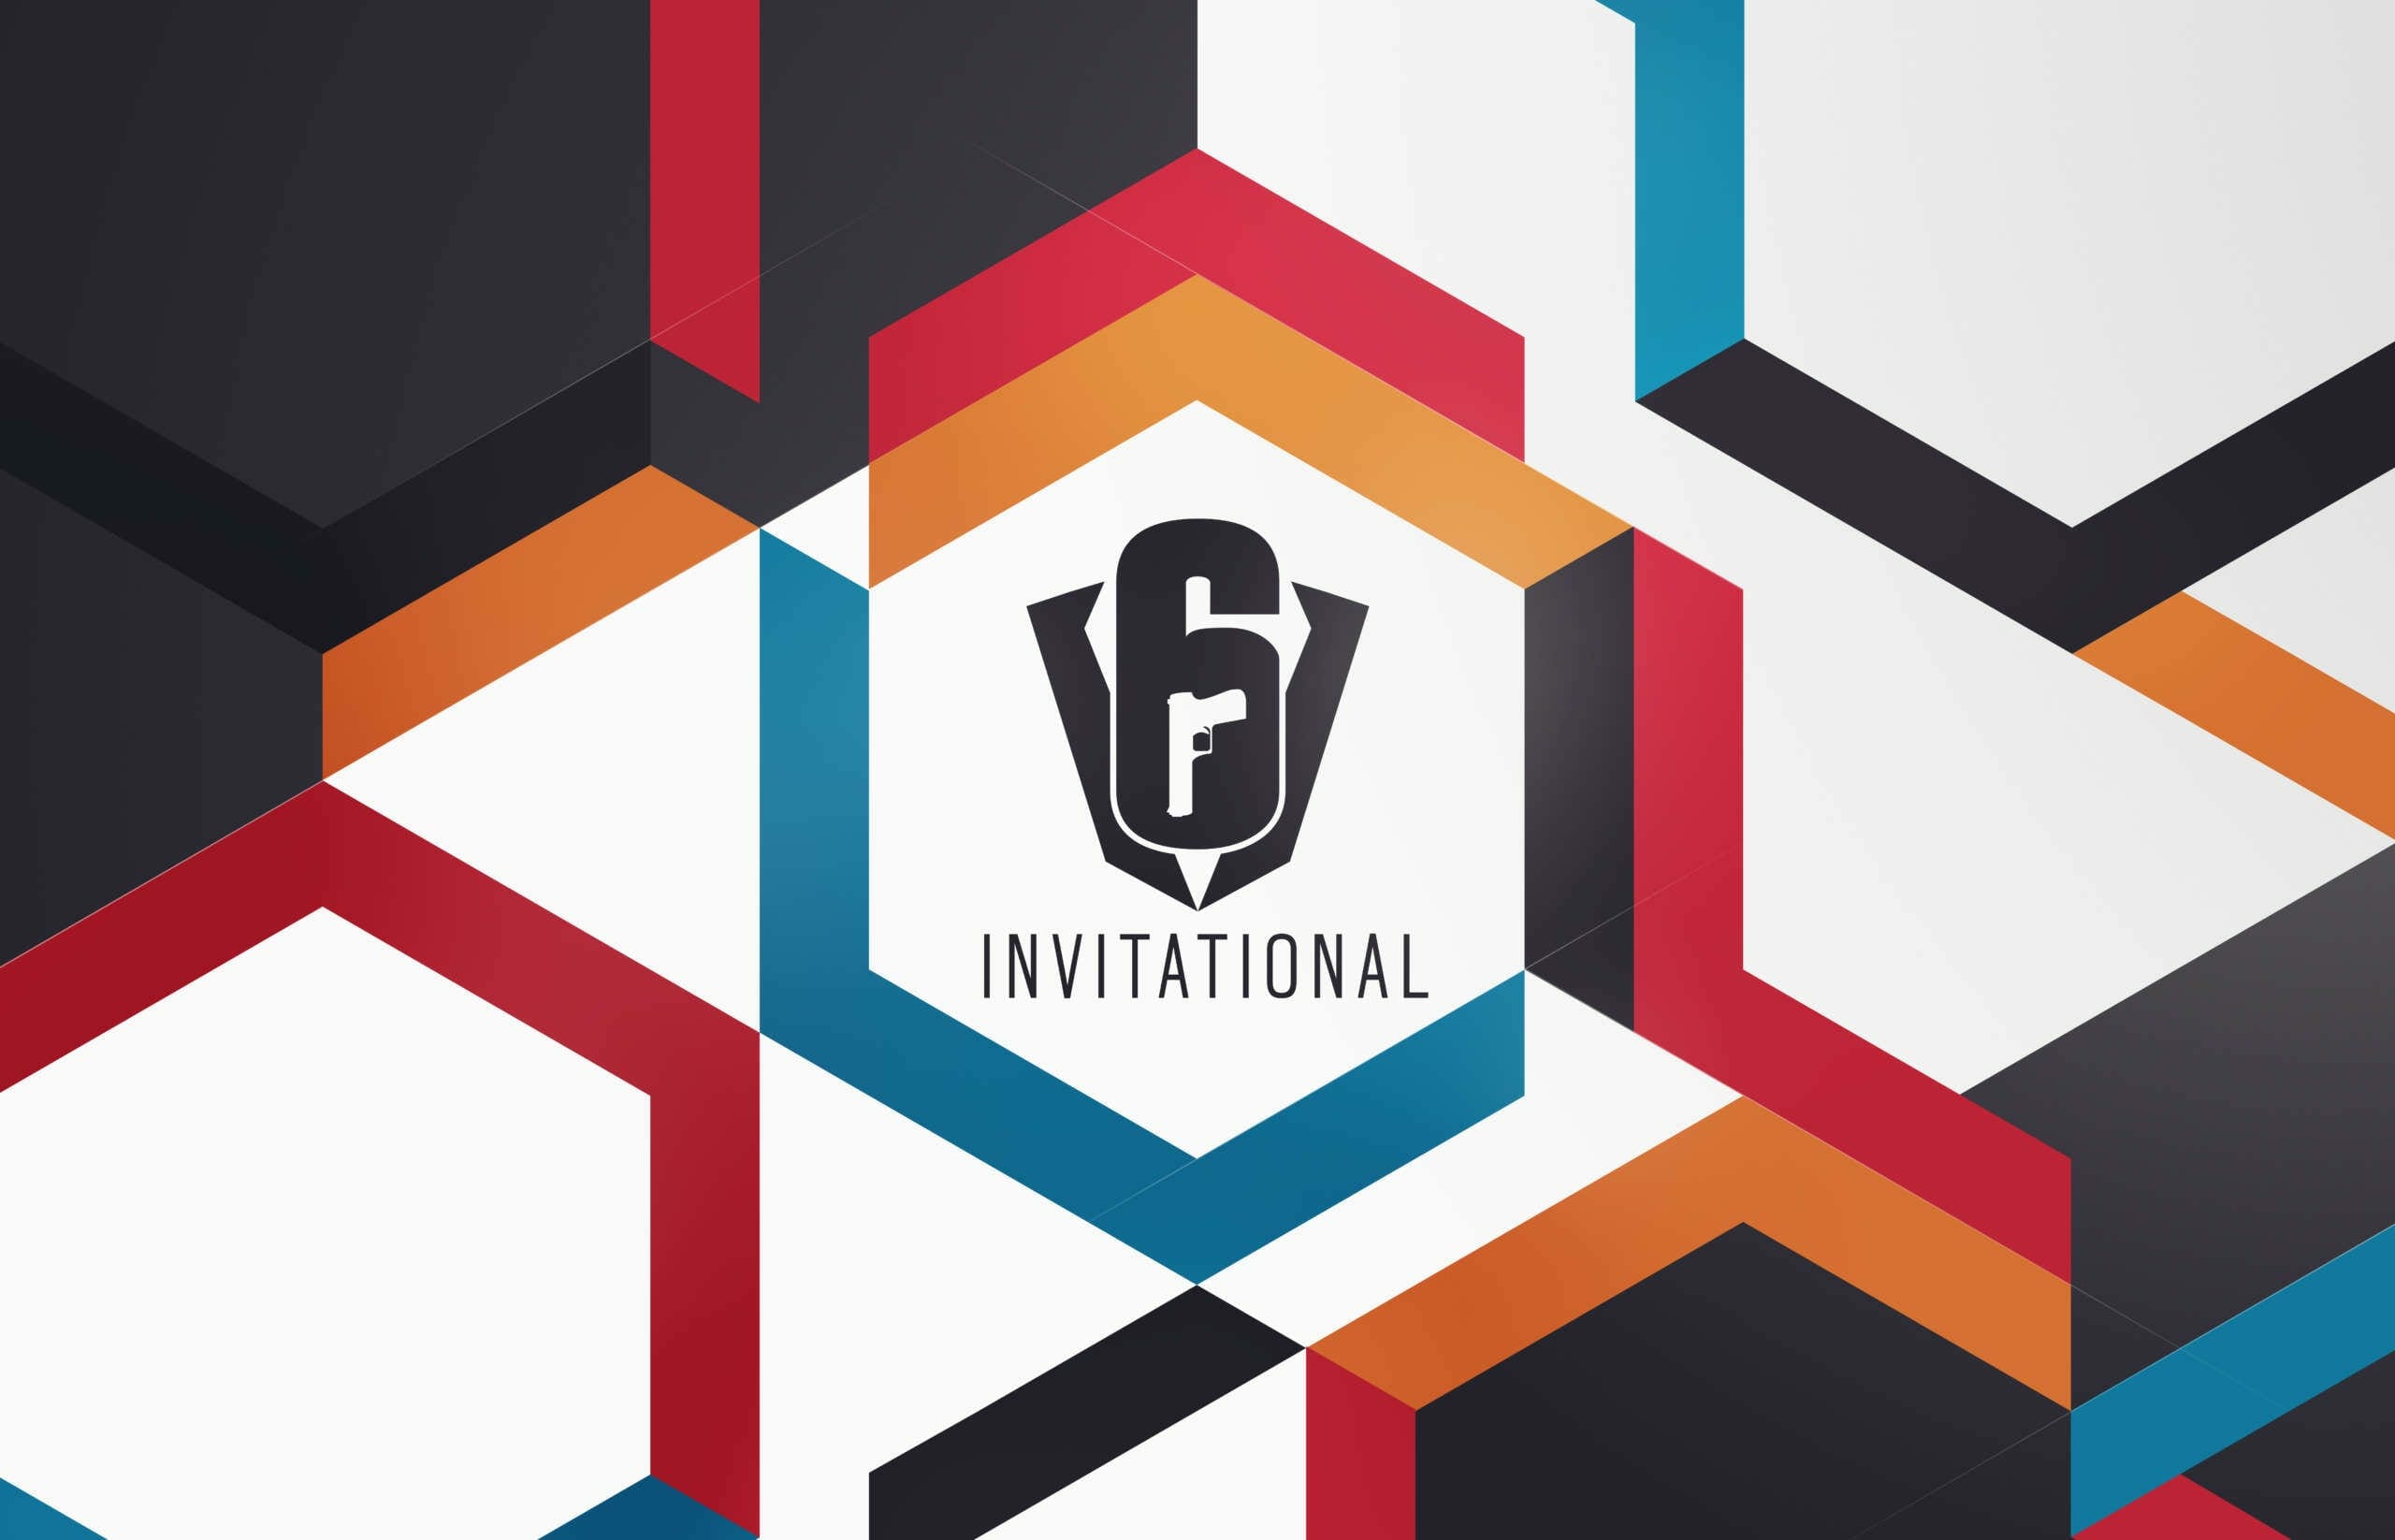 The Road to Six Invitational